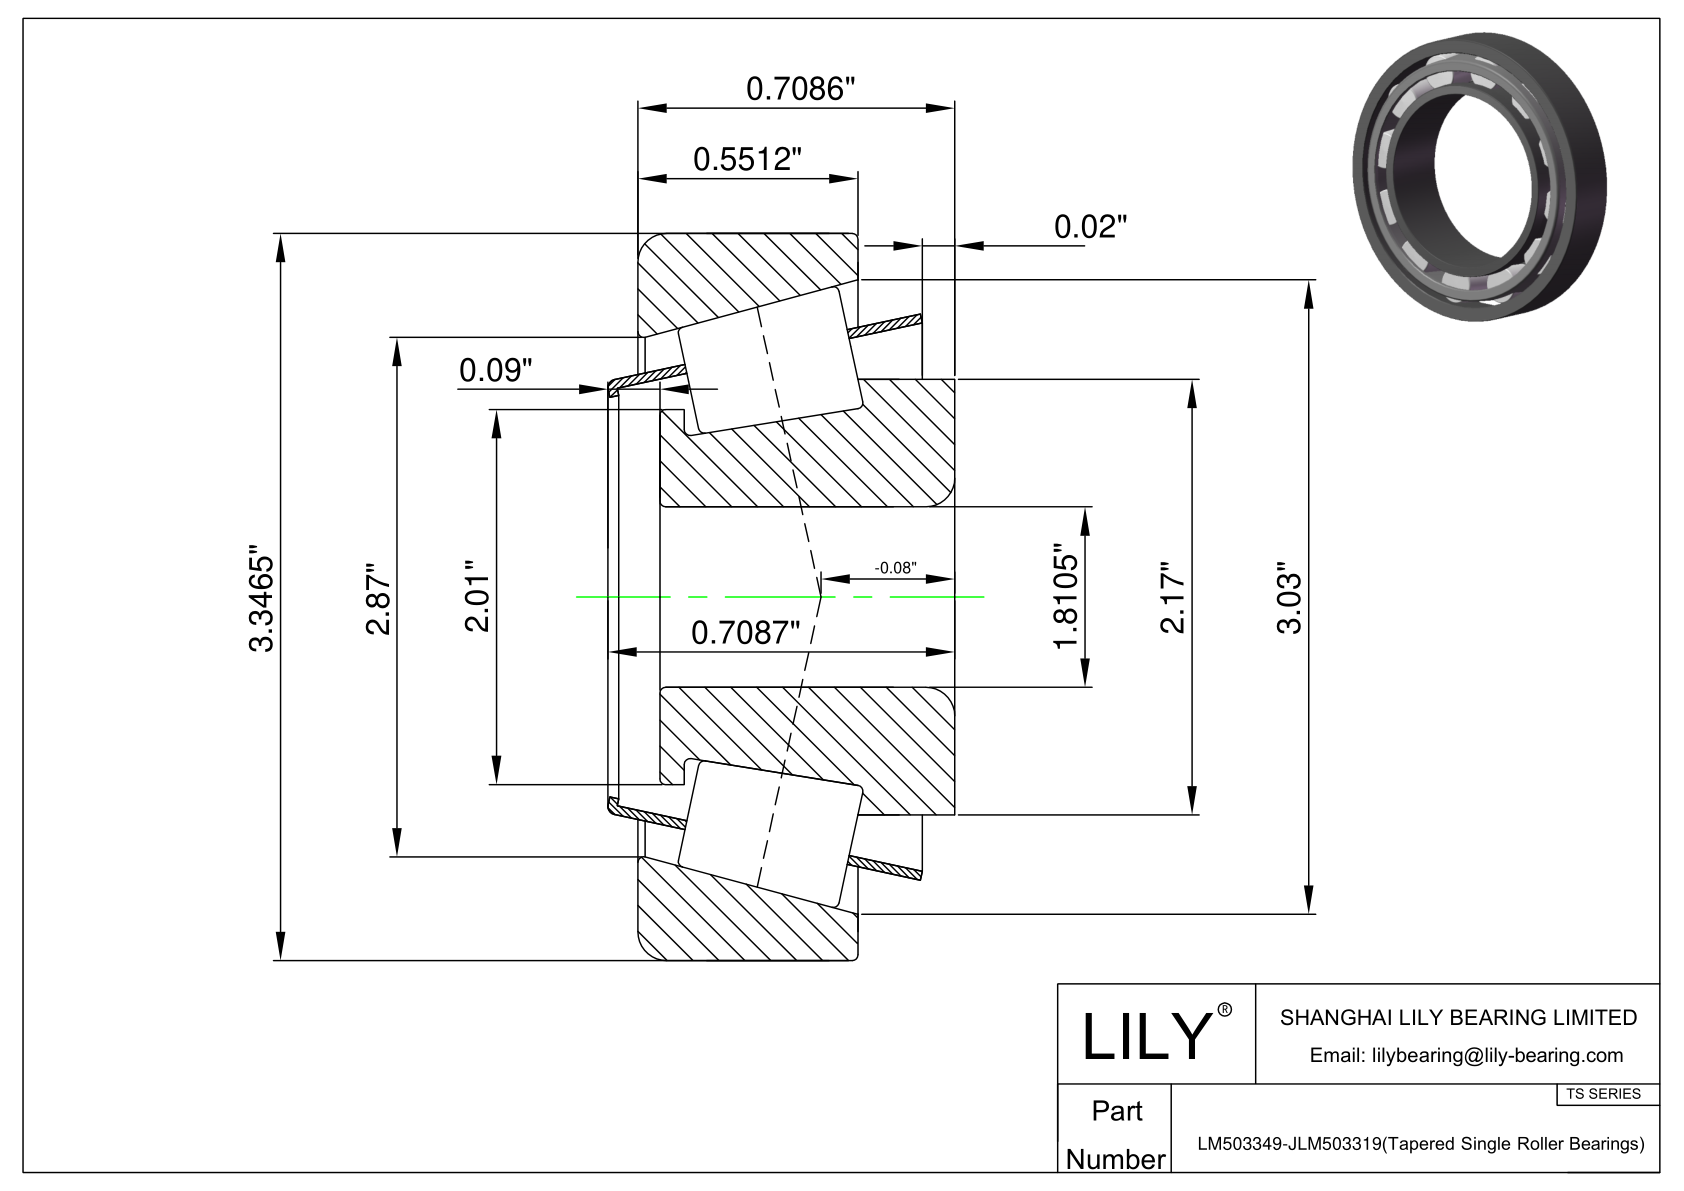 LM503349-JLM503319 TS (Tapered Single Roller Bearings) (Imperial) cad drawing